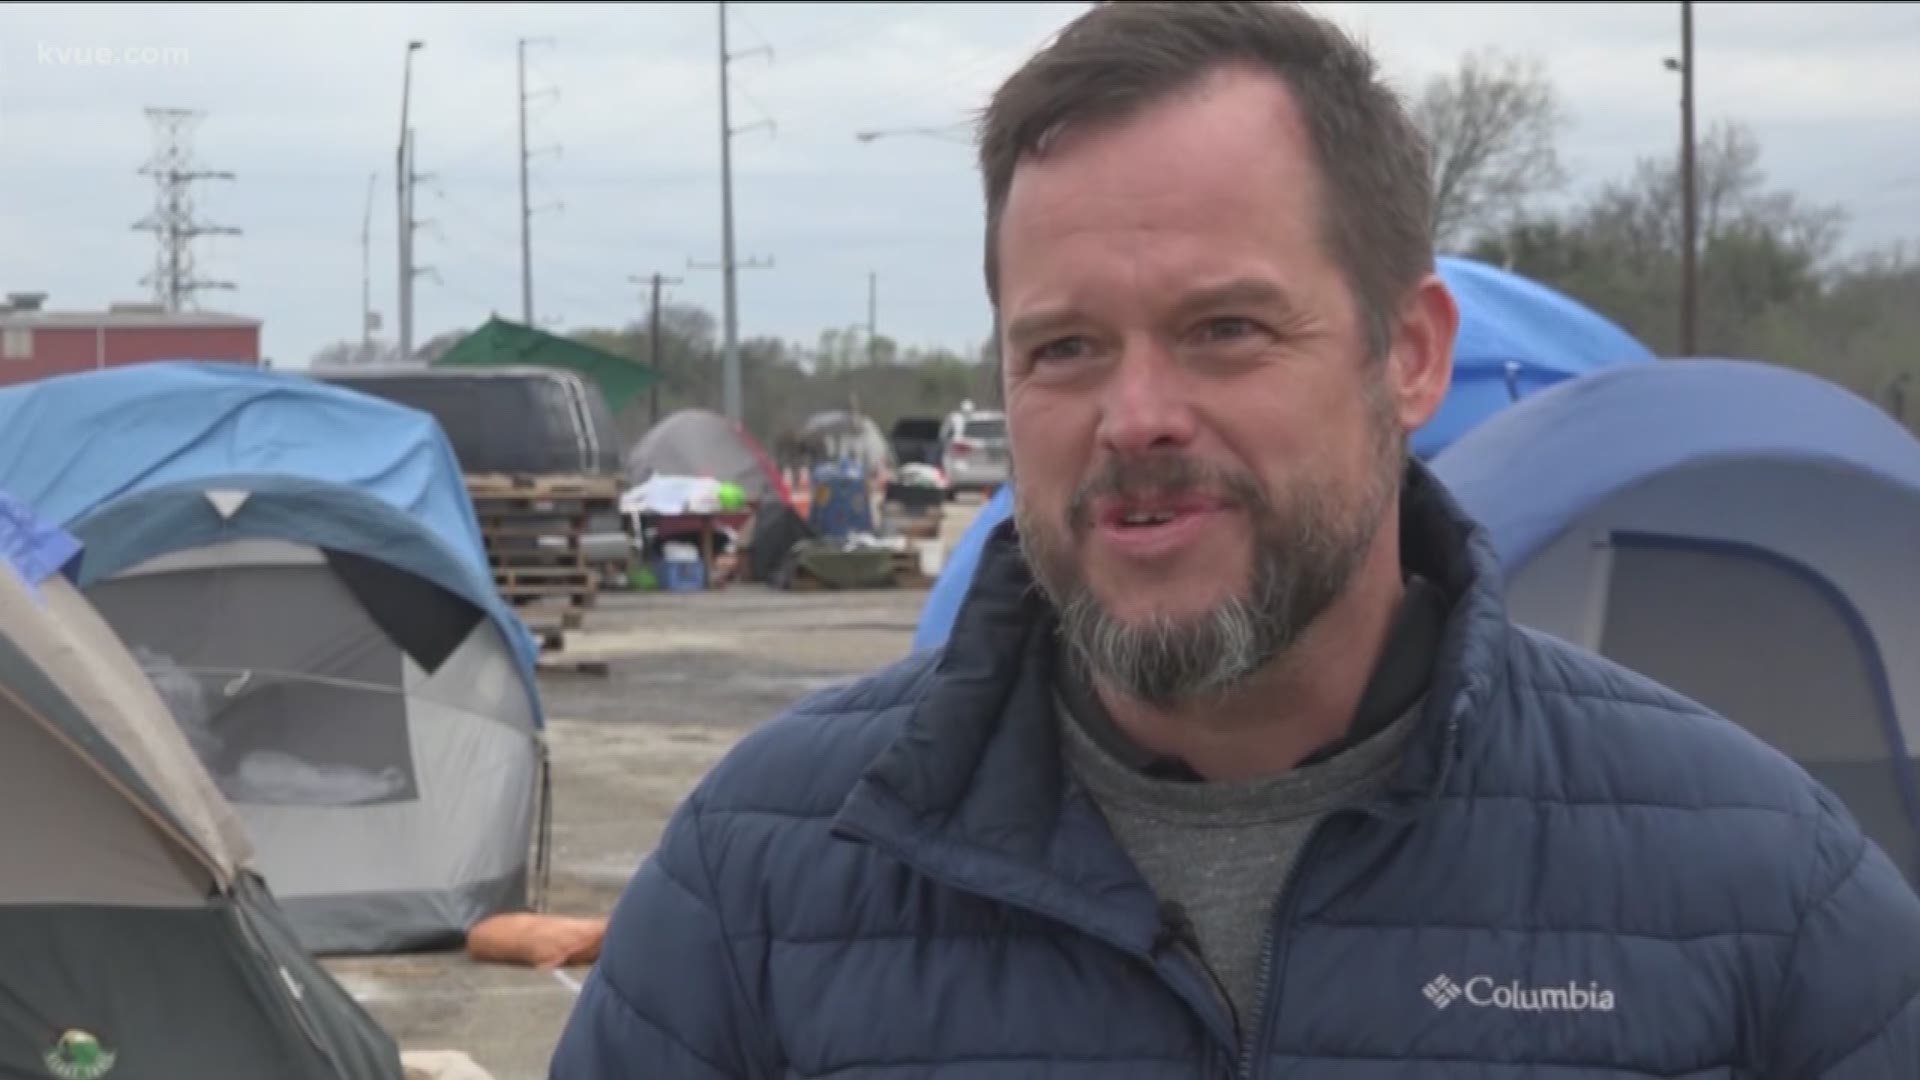 Right now, more than 130 people call the state's homeless camp home.